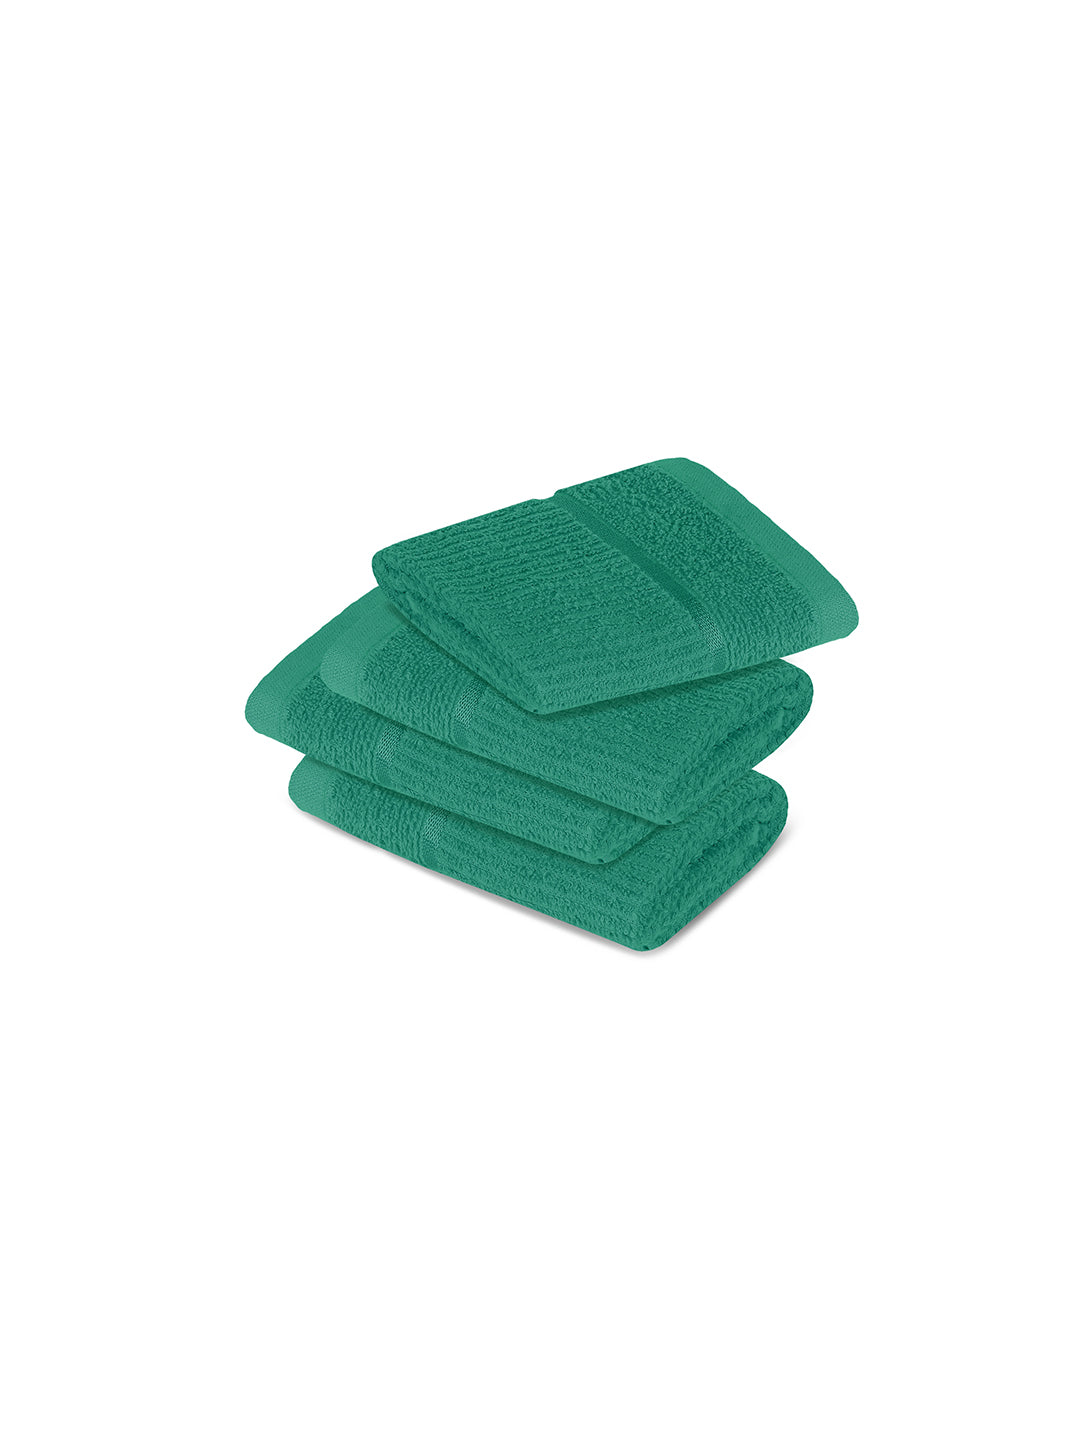 Comfort Classic Quickdry Pack of 4 Face Towels